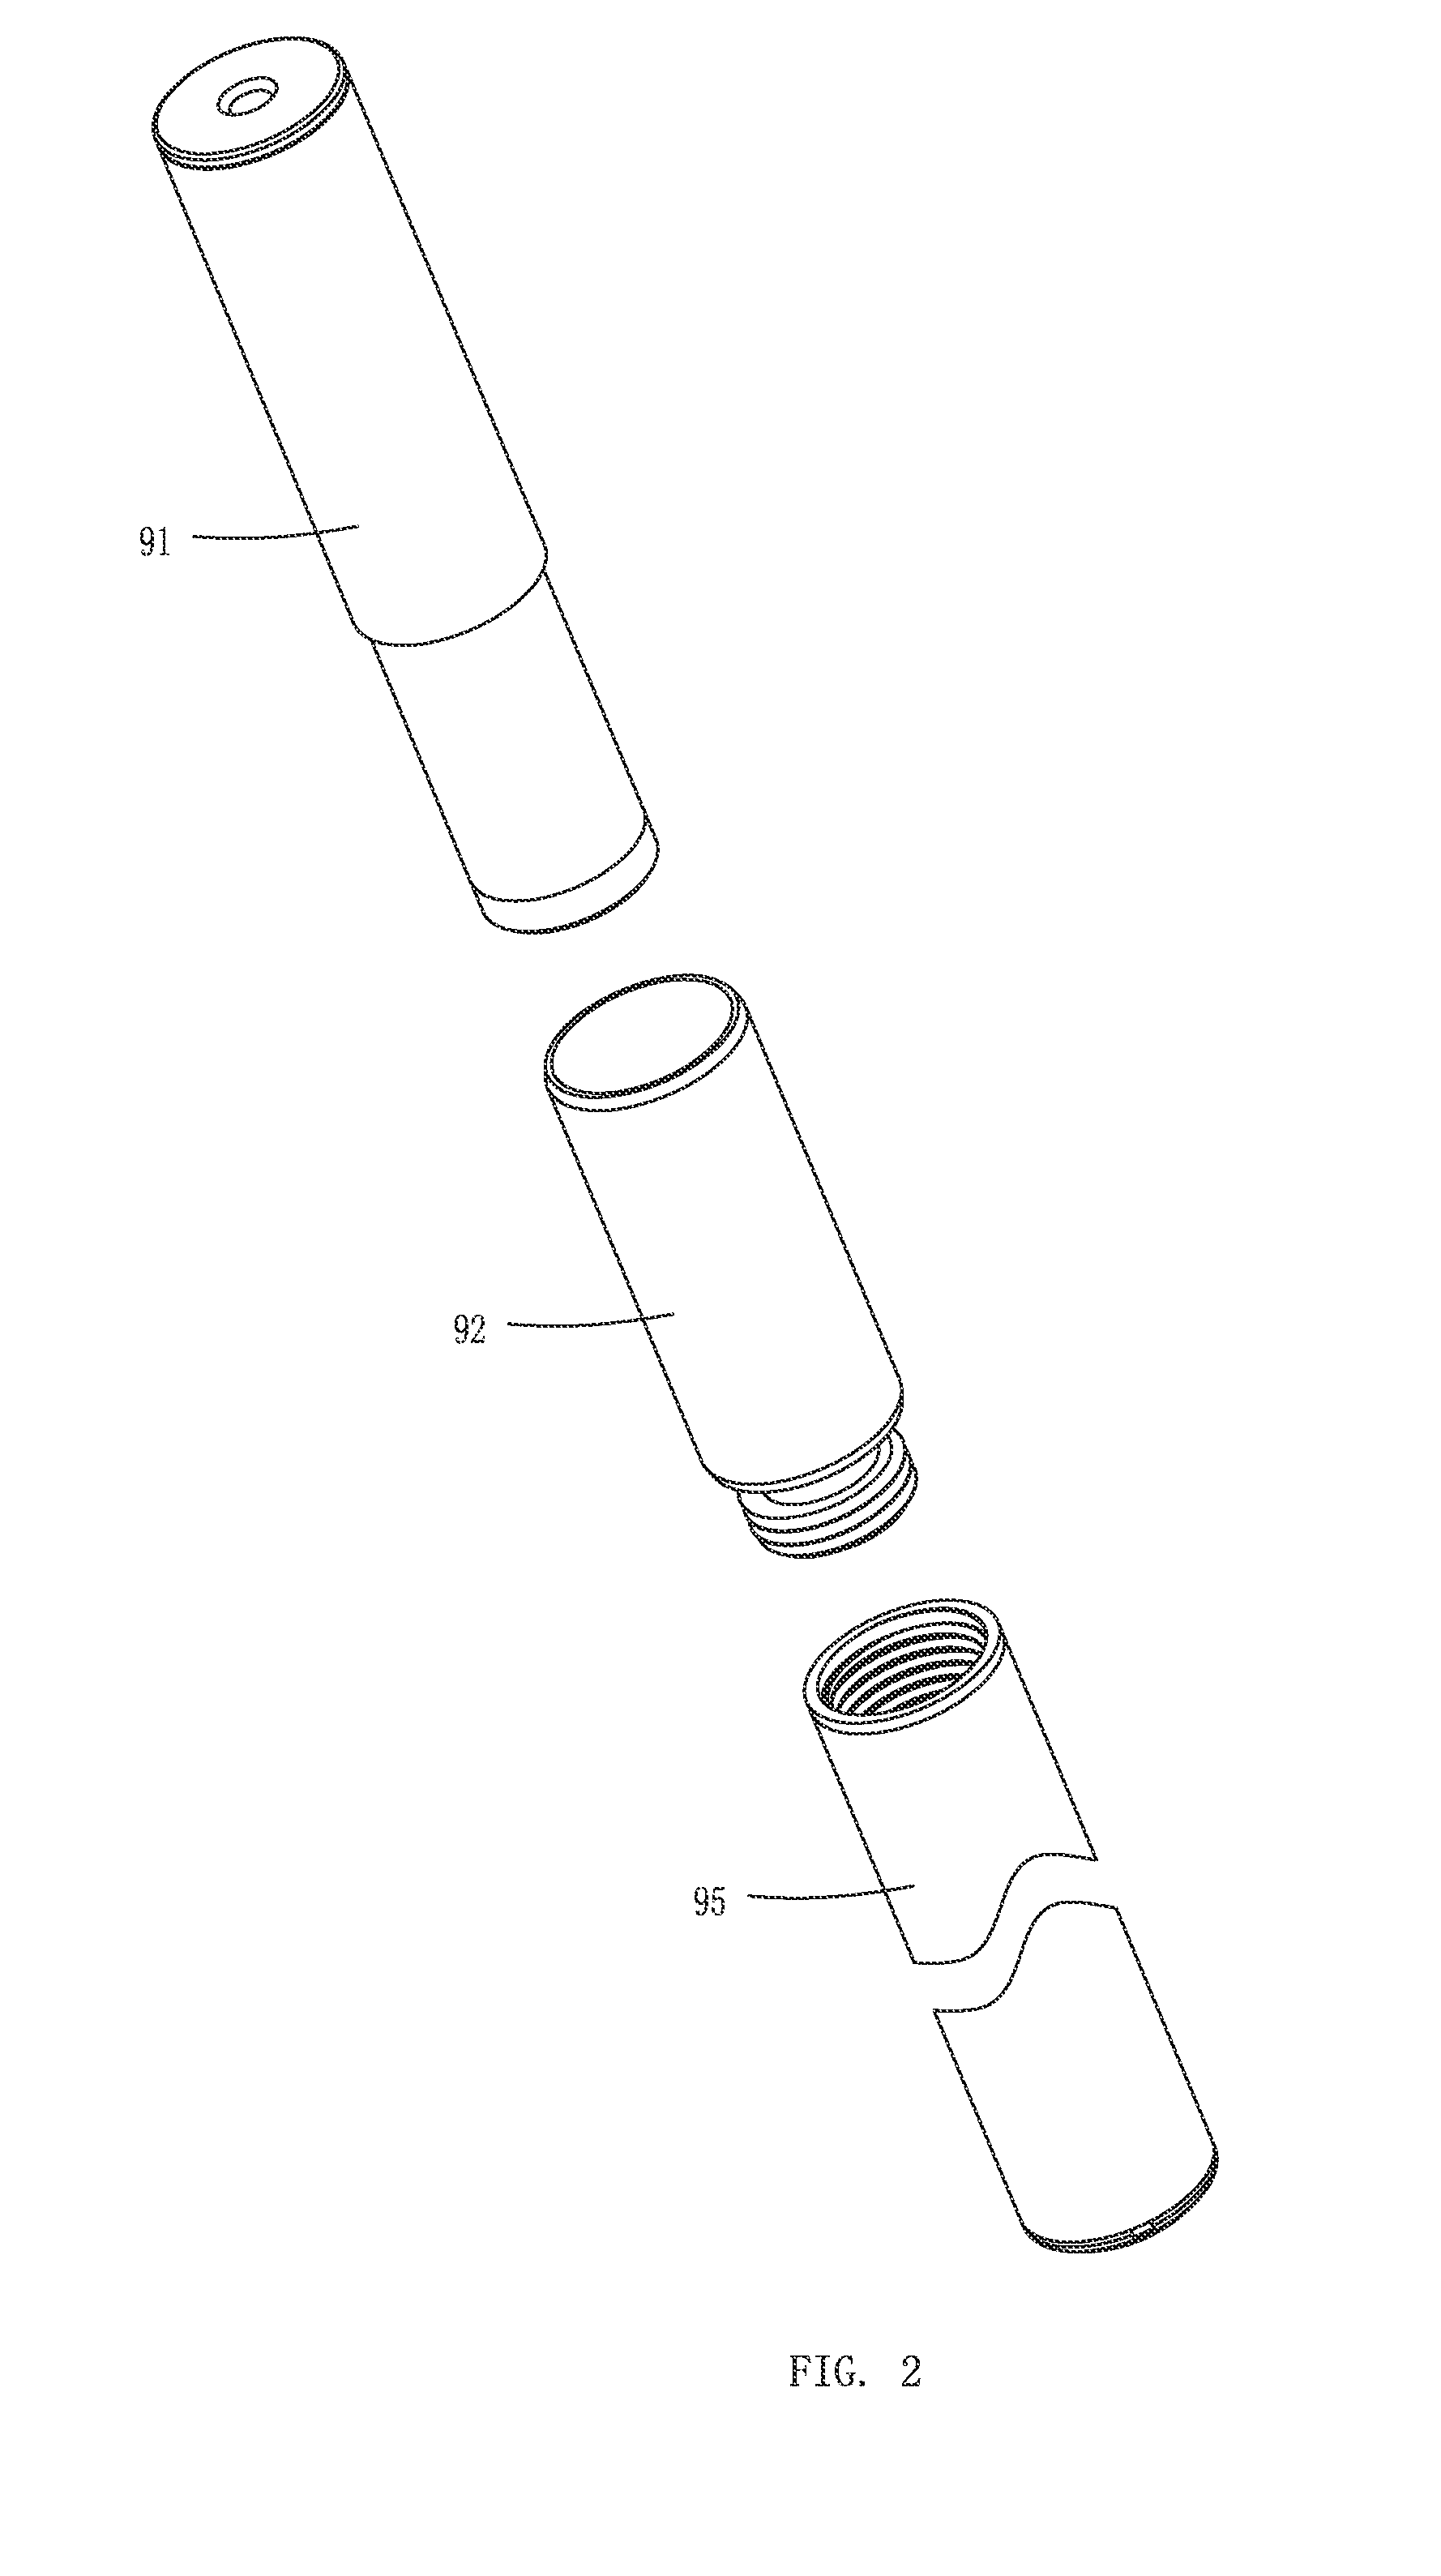 Electronic Cigarette Having A Connector for Magnetic Connection